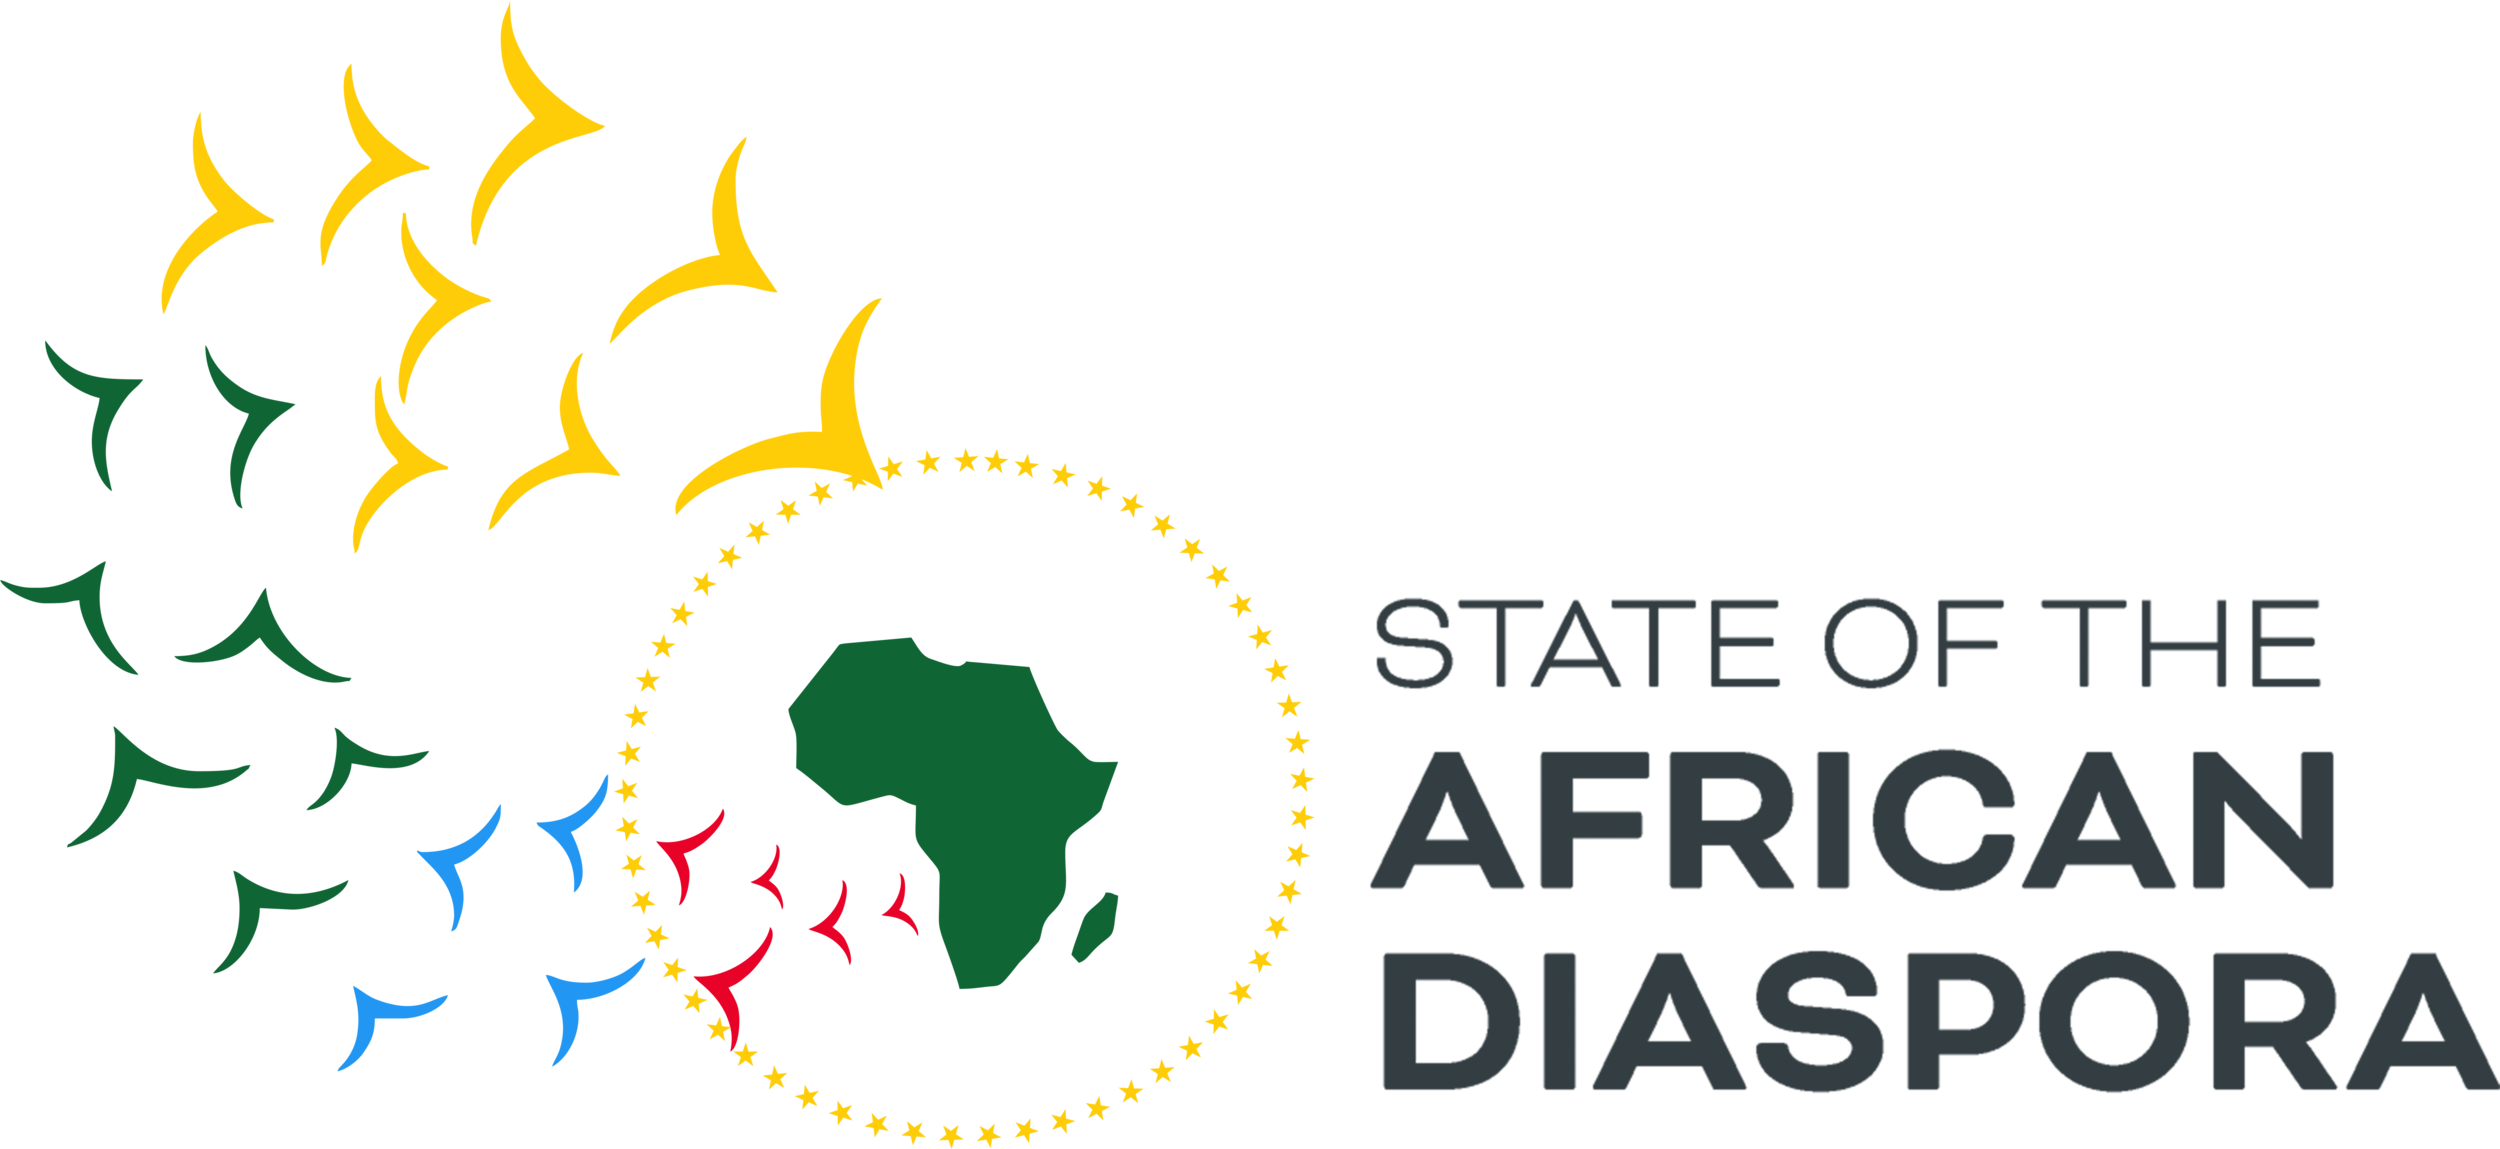 state of the african diaspora Logo.png